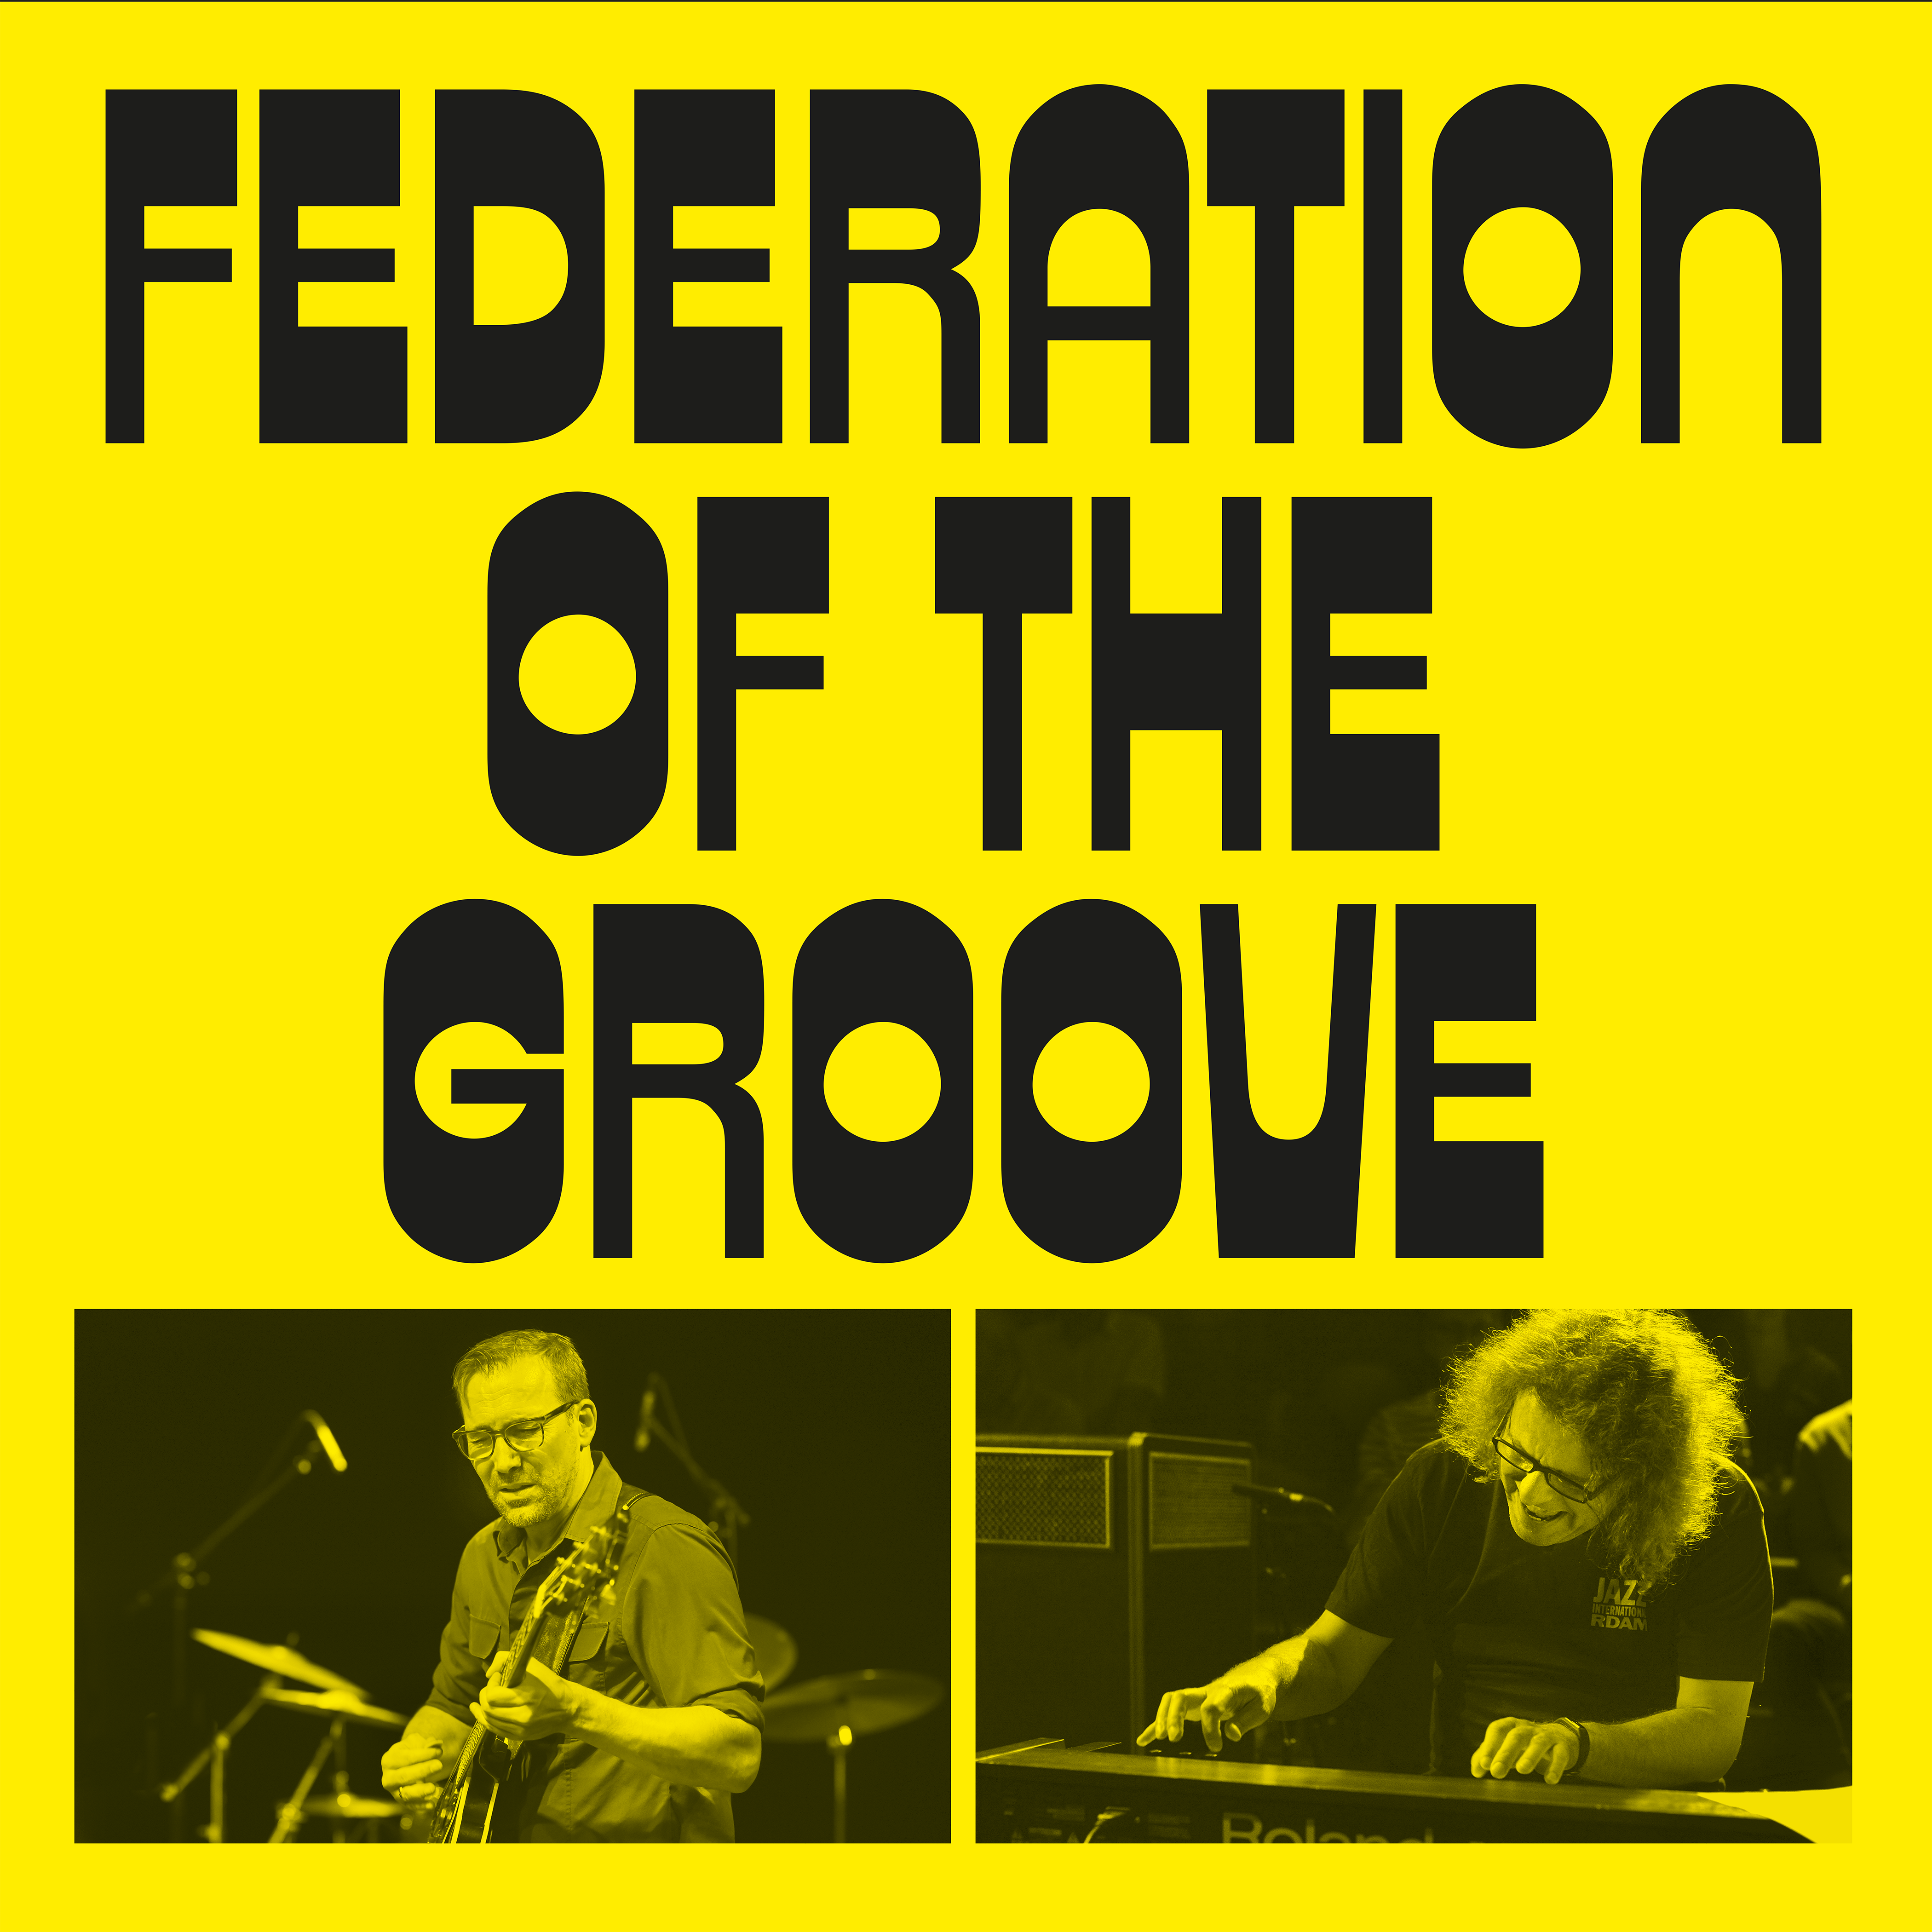 Federation-of-the-Groove_Cover-inside_left